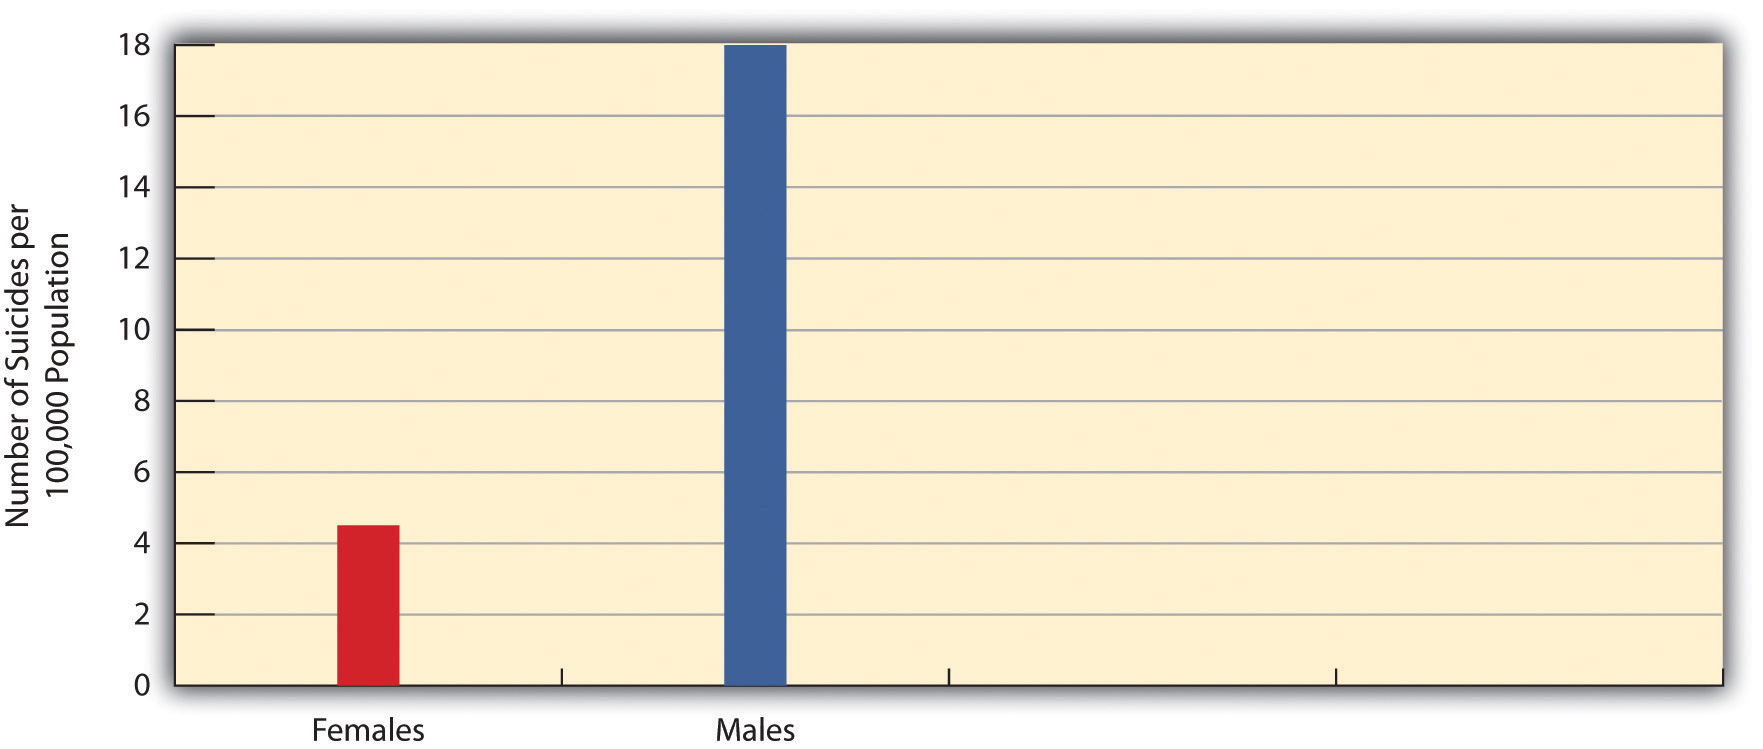 Gender and Suicide Rate (males are much higher than females)